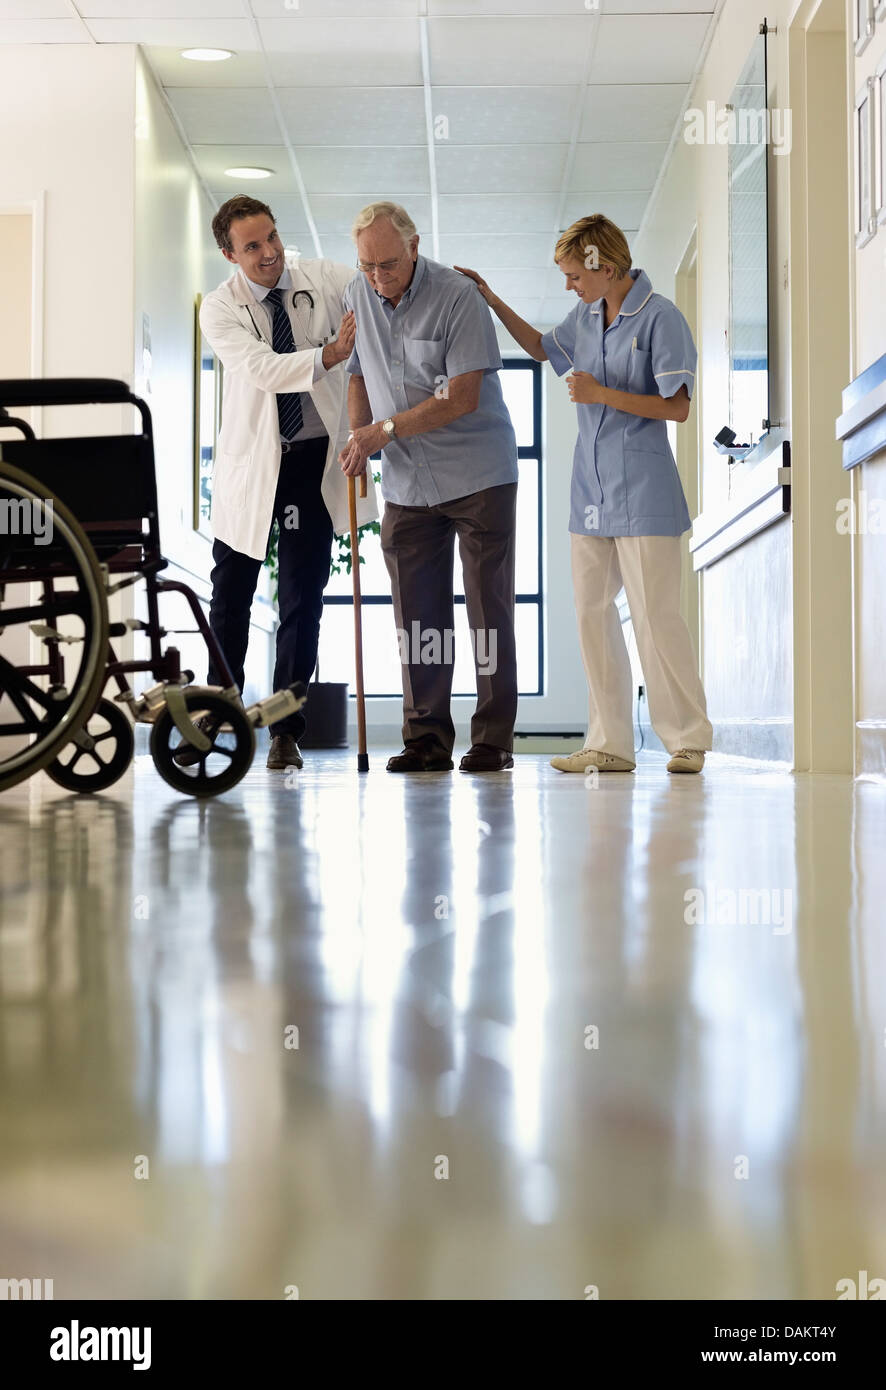 Doctor and nurse helping older patient walk in hospital Stock Photo